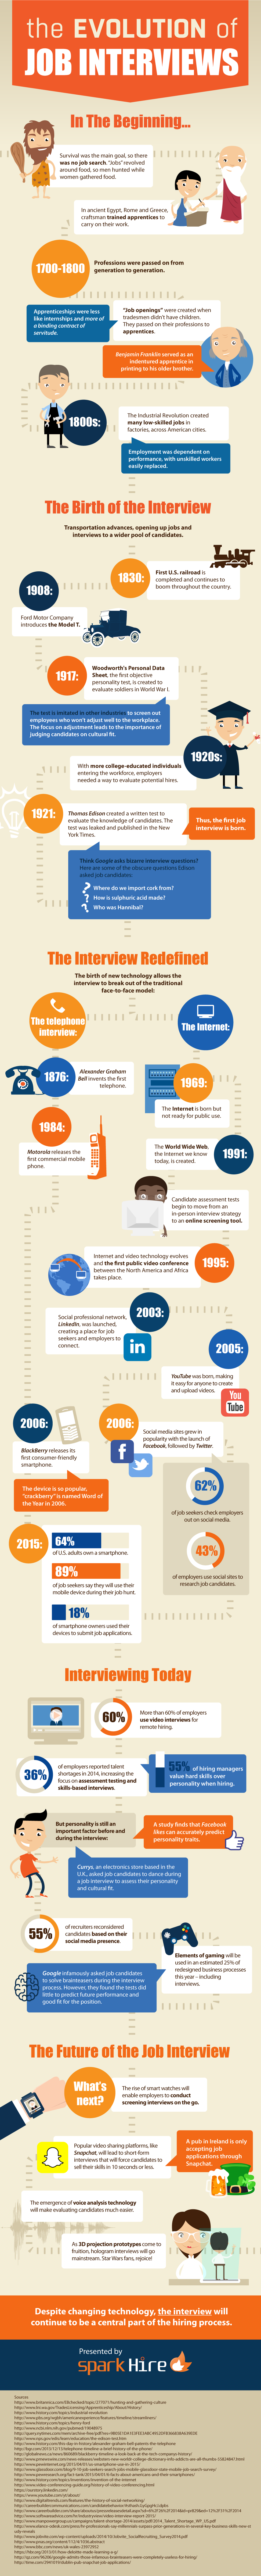 The-Evolution-of-the-Job-Interview-Infographic-972